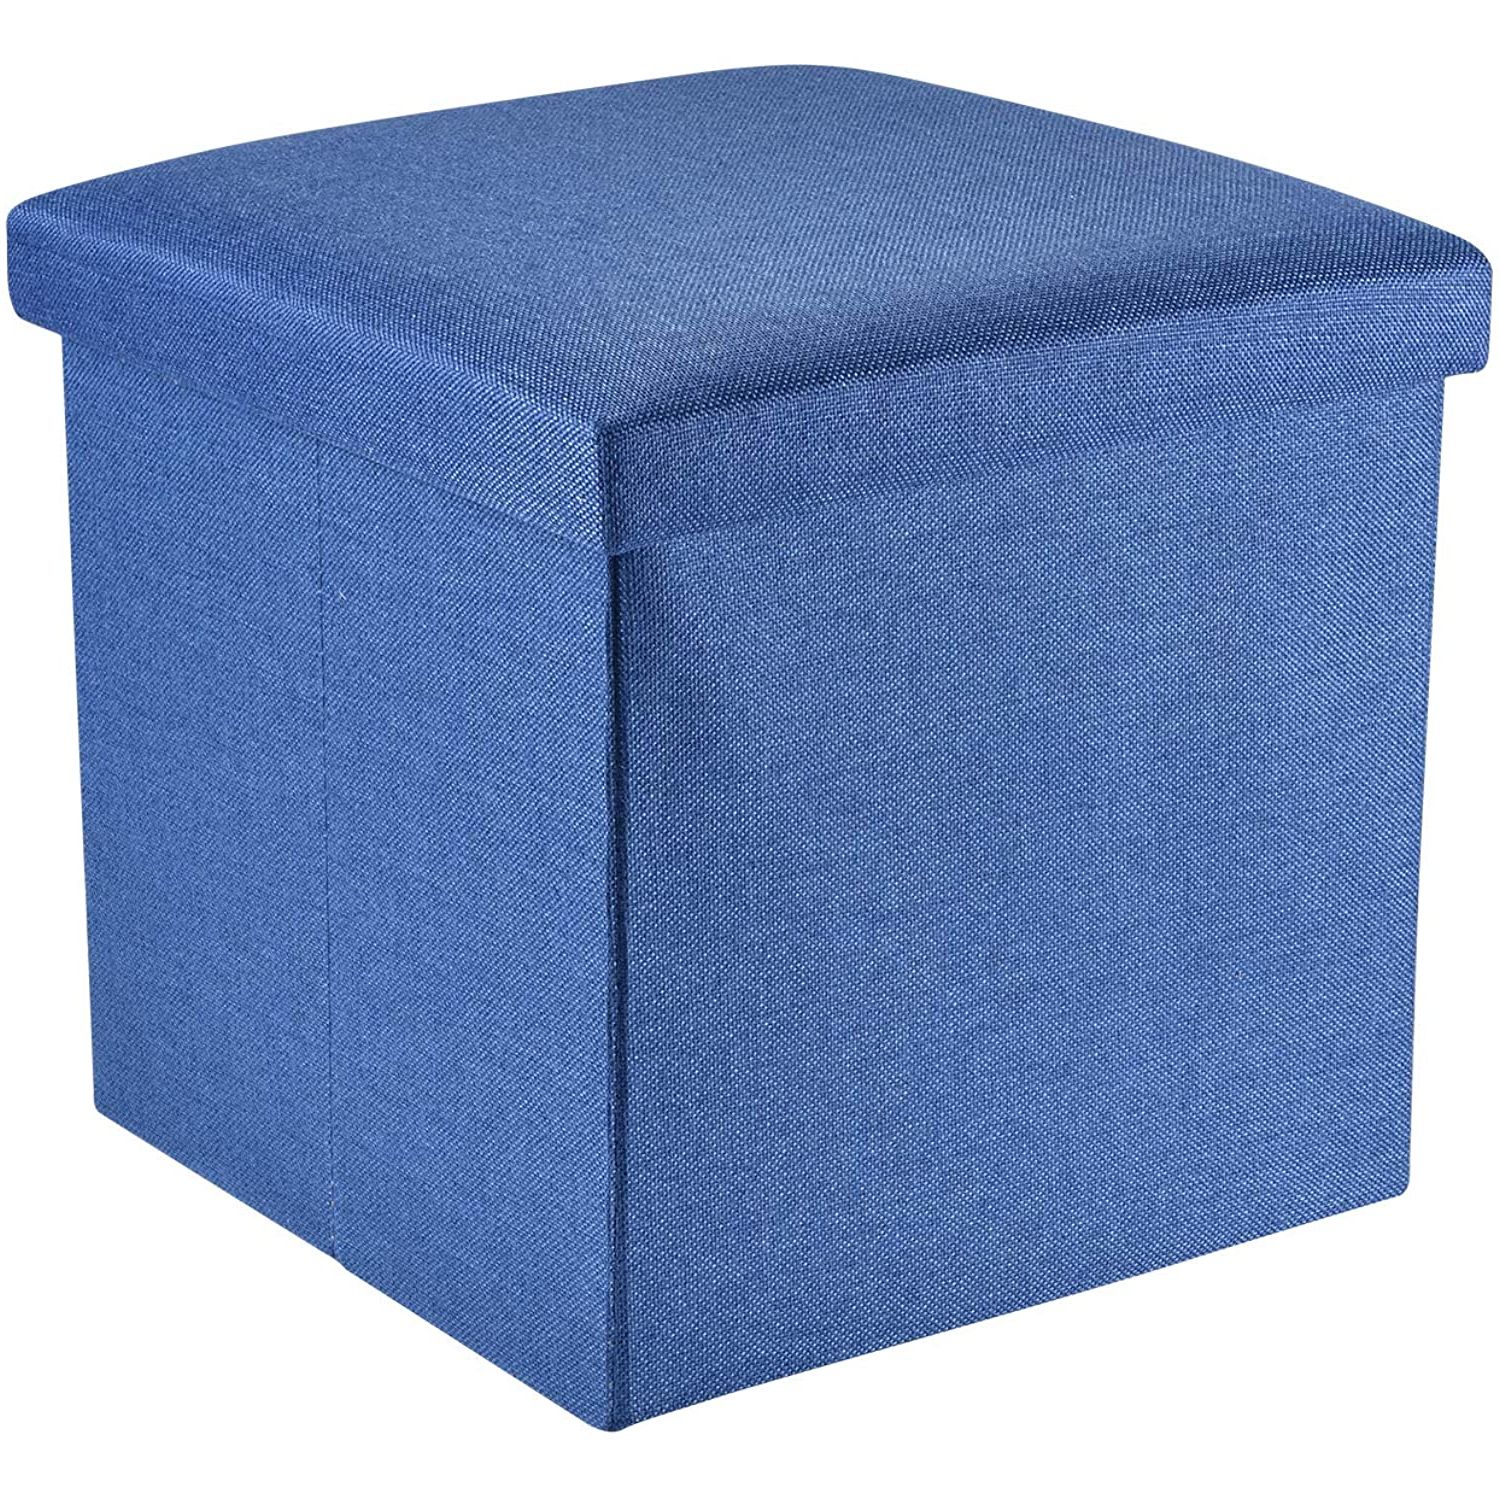 Amazon: Beborin 15 Inches Storage Ottoman Cube, Foldable Storage Intended For Popular Gray And Beige Solid Cube Pouf Ottomans (View 2 of 10)